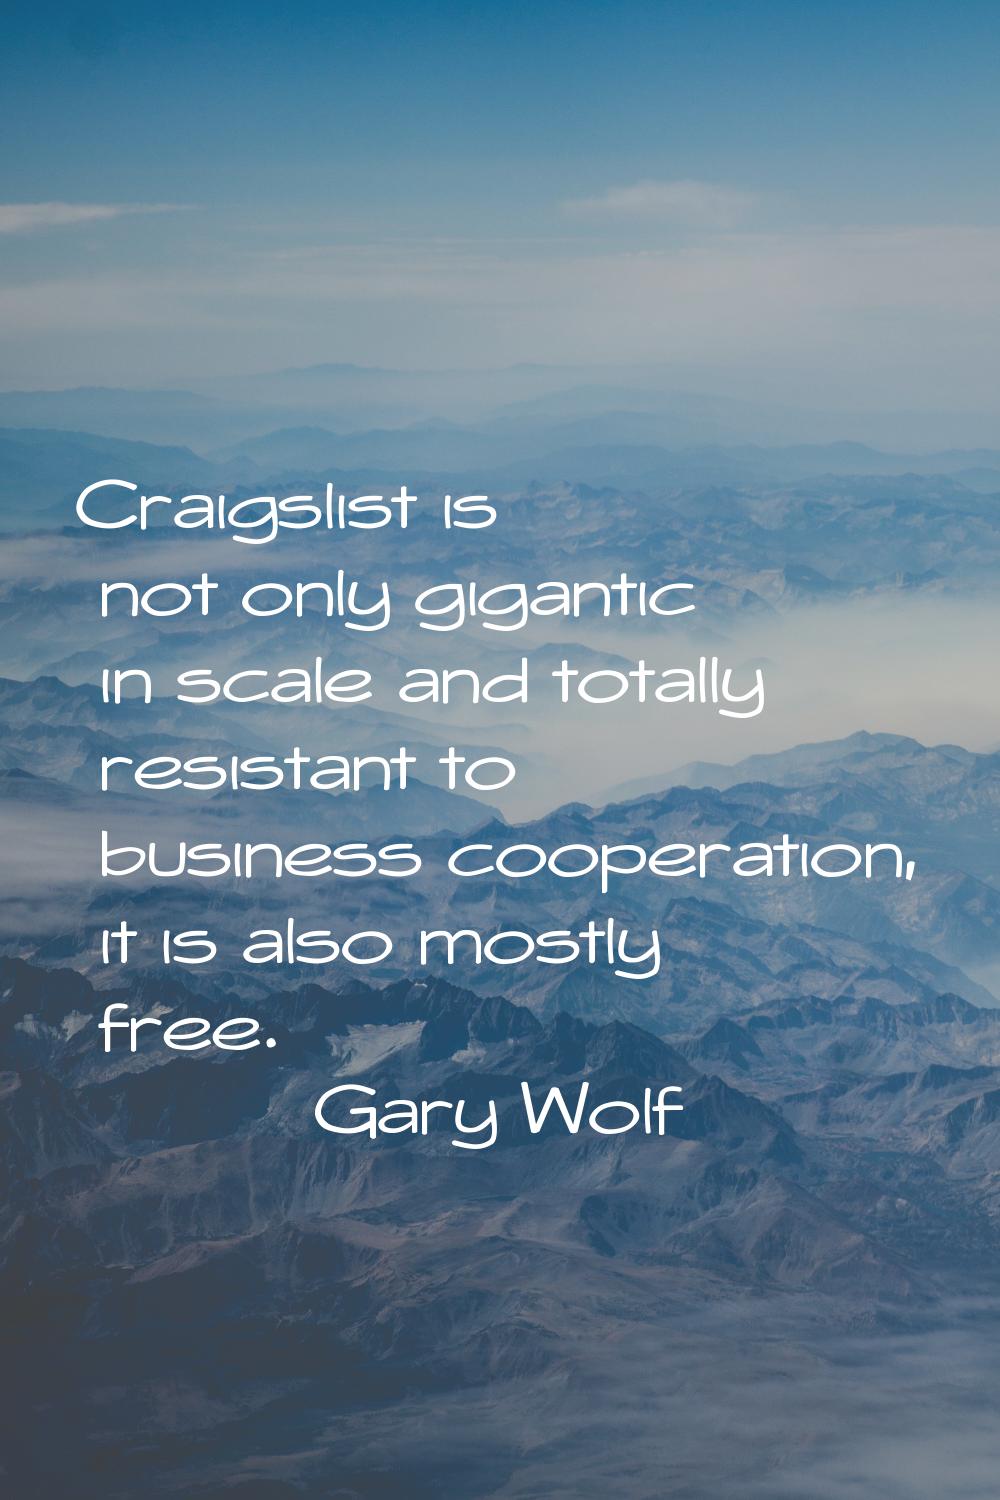 Craigslist is not only gigantic in scale and totally resistant to business cooperation, it is also 